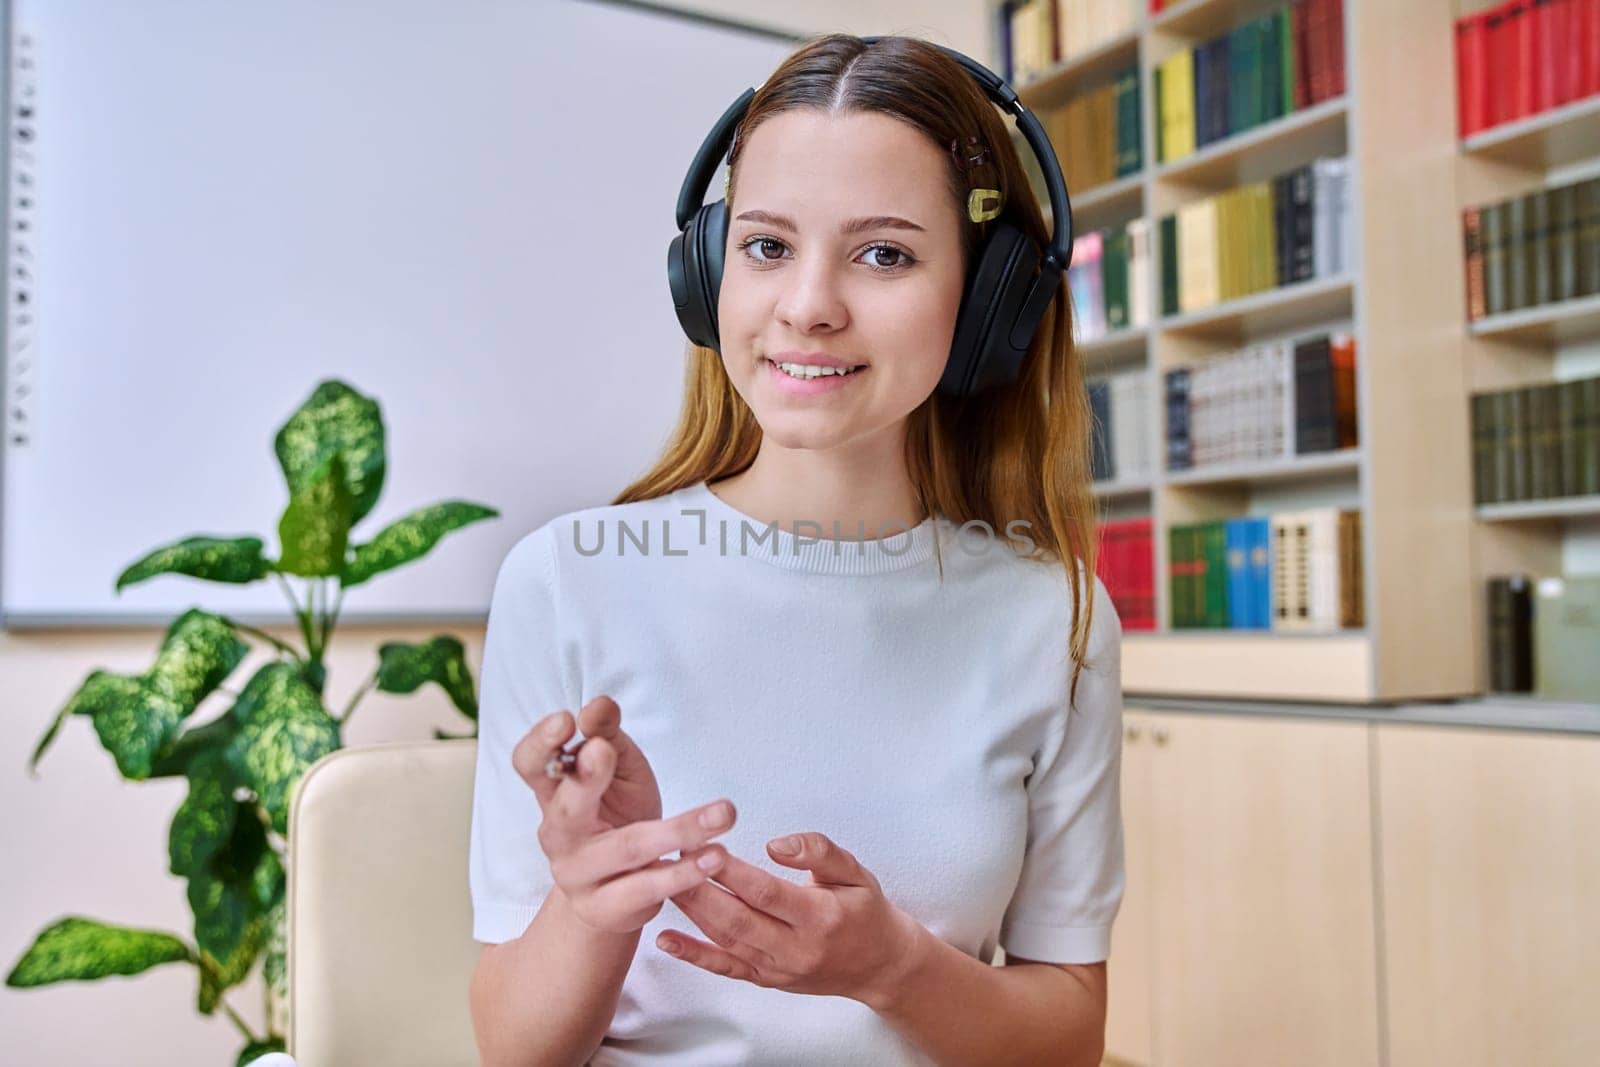 Webcam view of teenage girl, high school student, in headphones, talking to camera. Female teenager studying remotely, video conference chat, online test exam lesson. Technology education adolescence